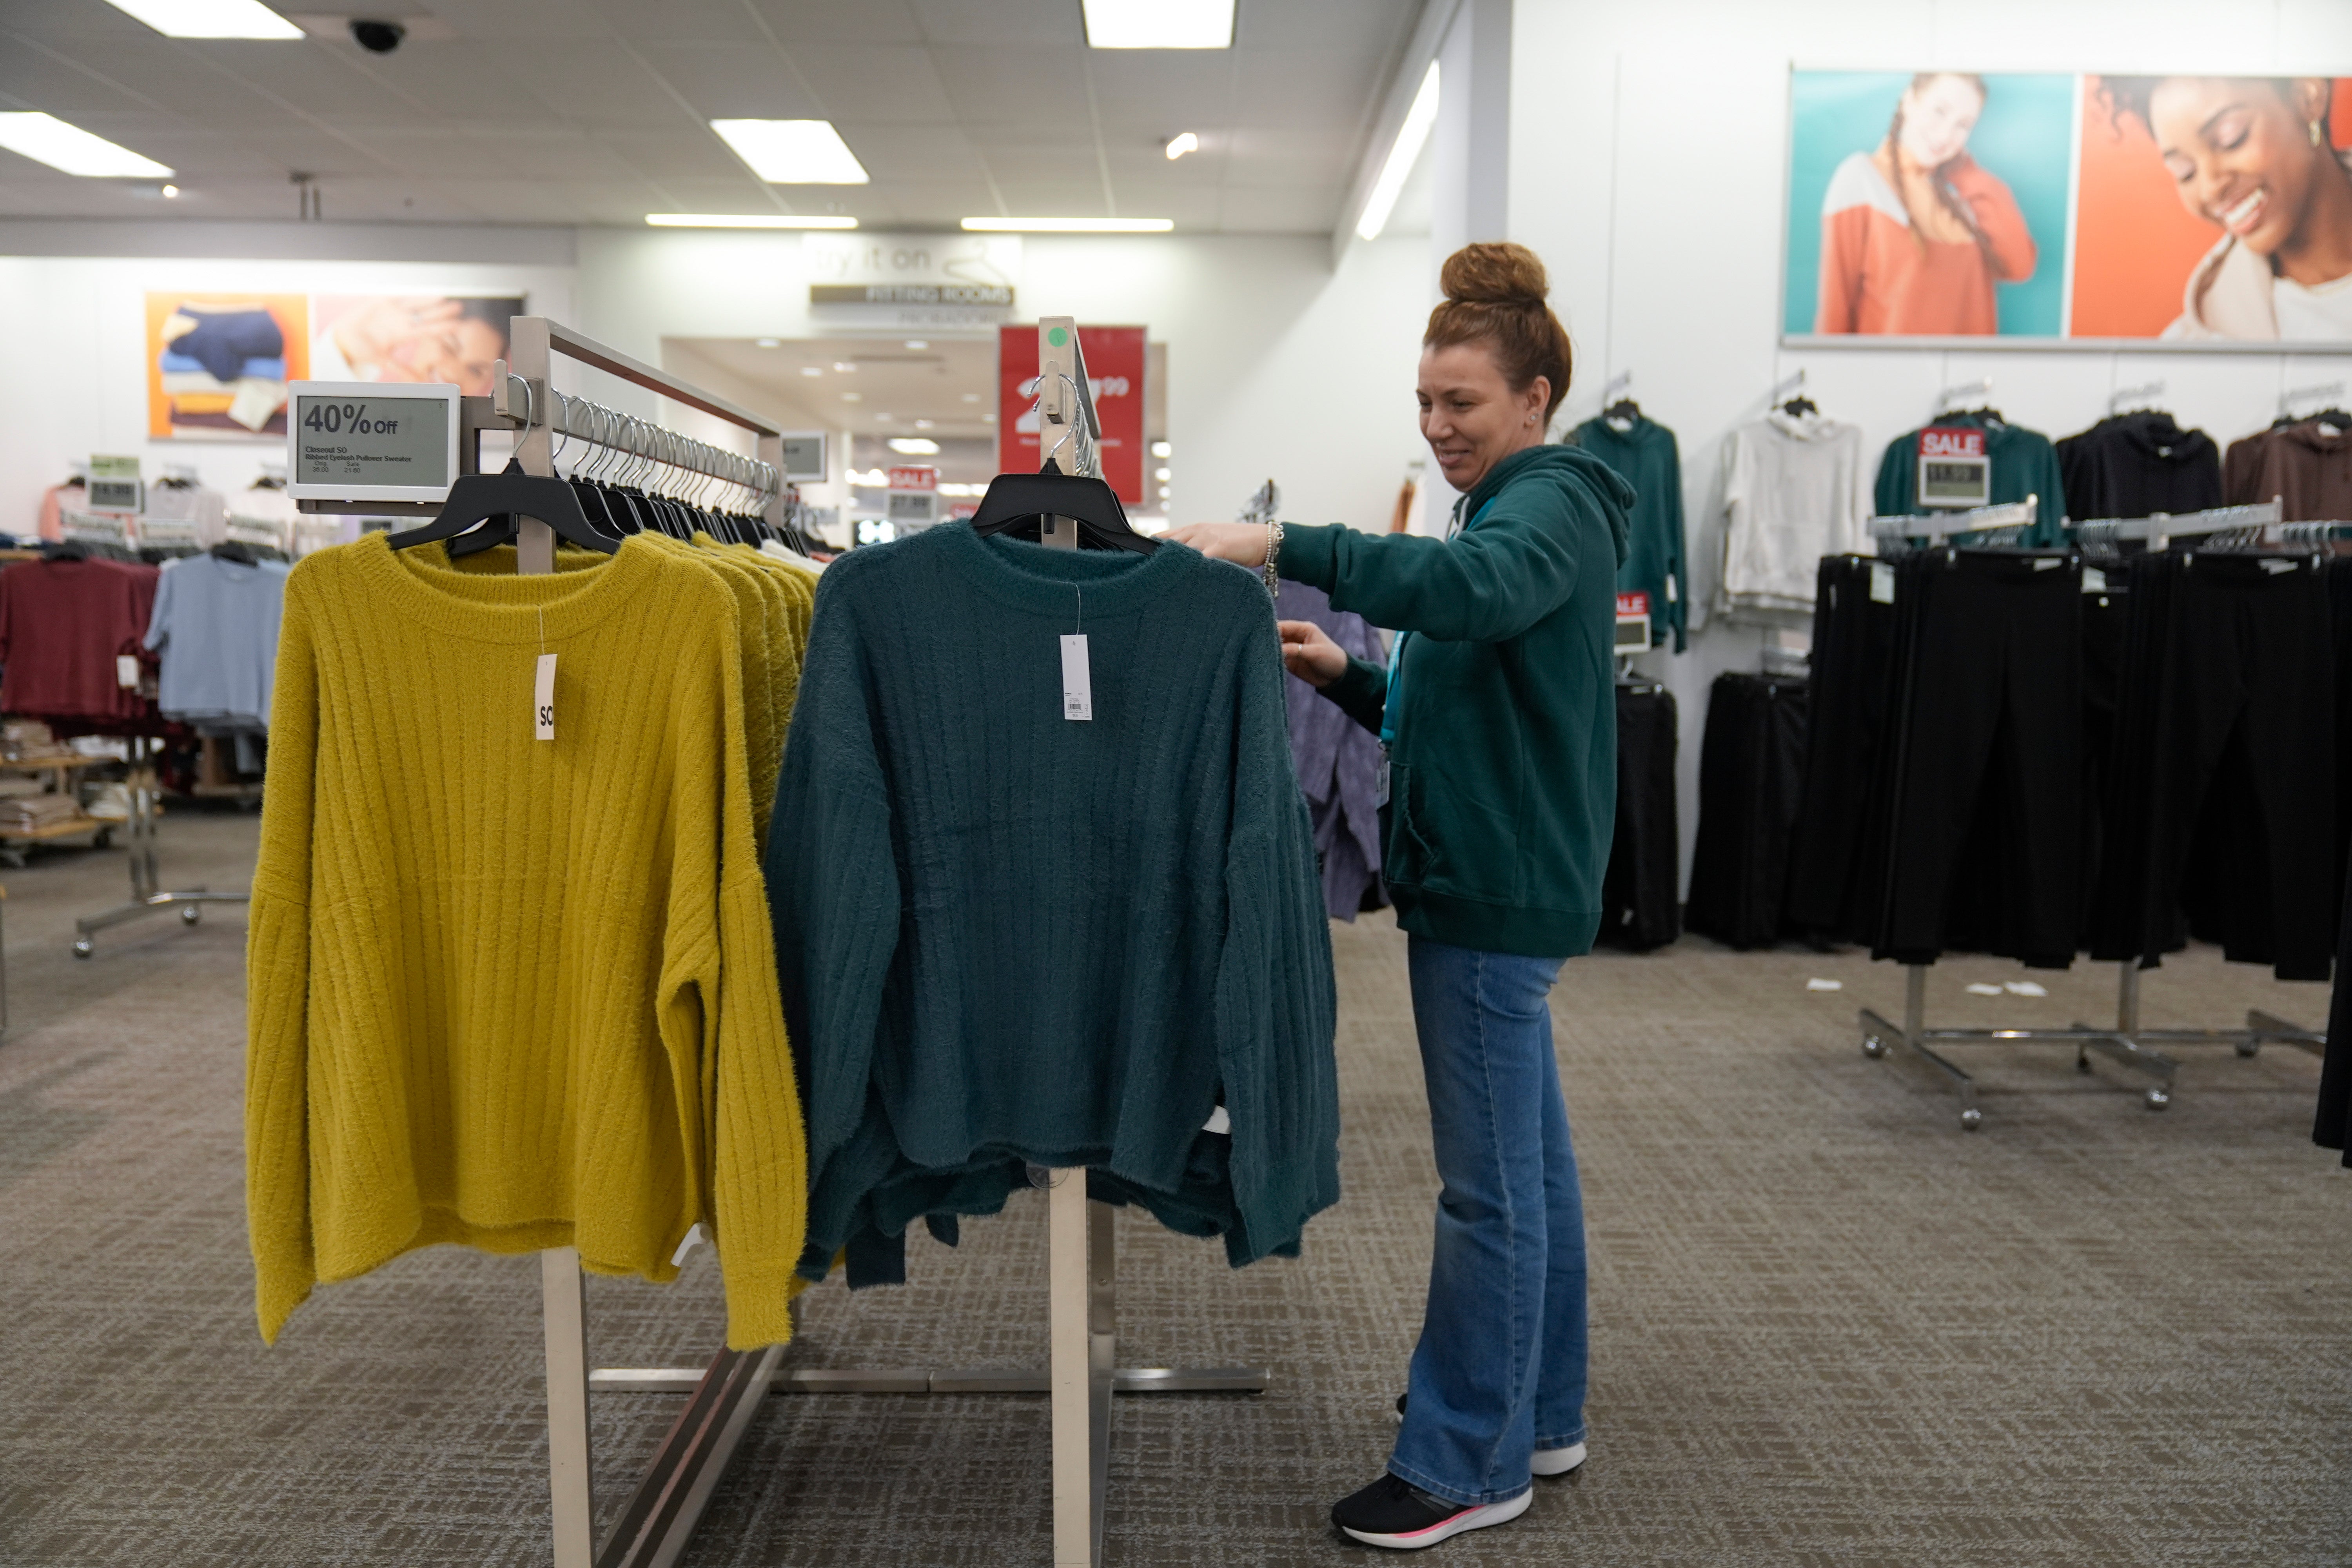 An employee straightens displays at a Kohl’s store in Clifton